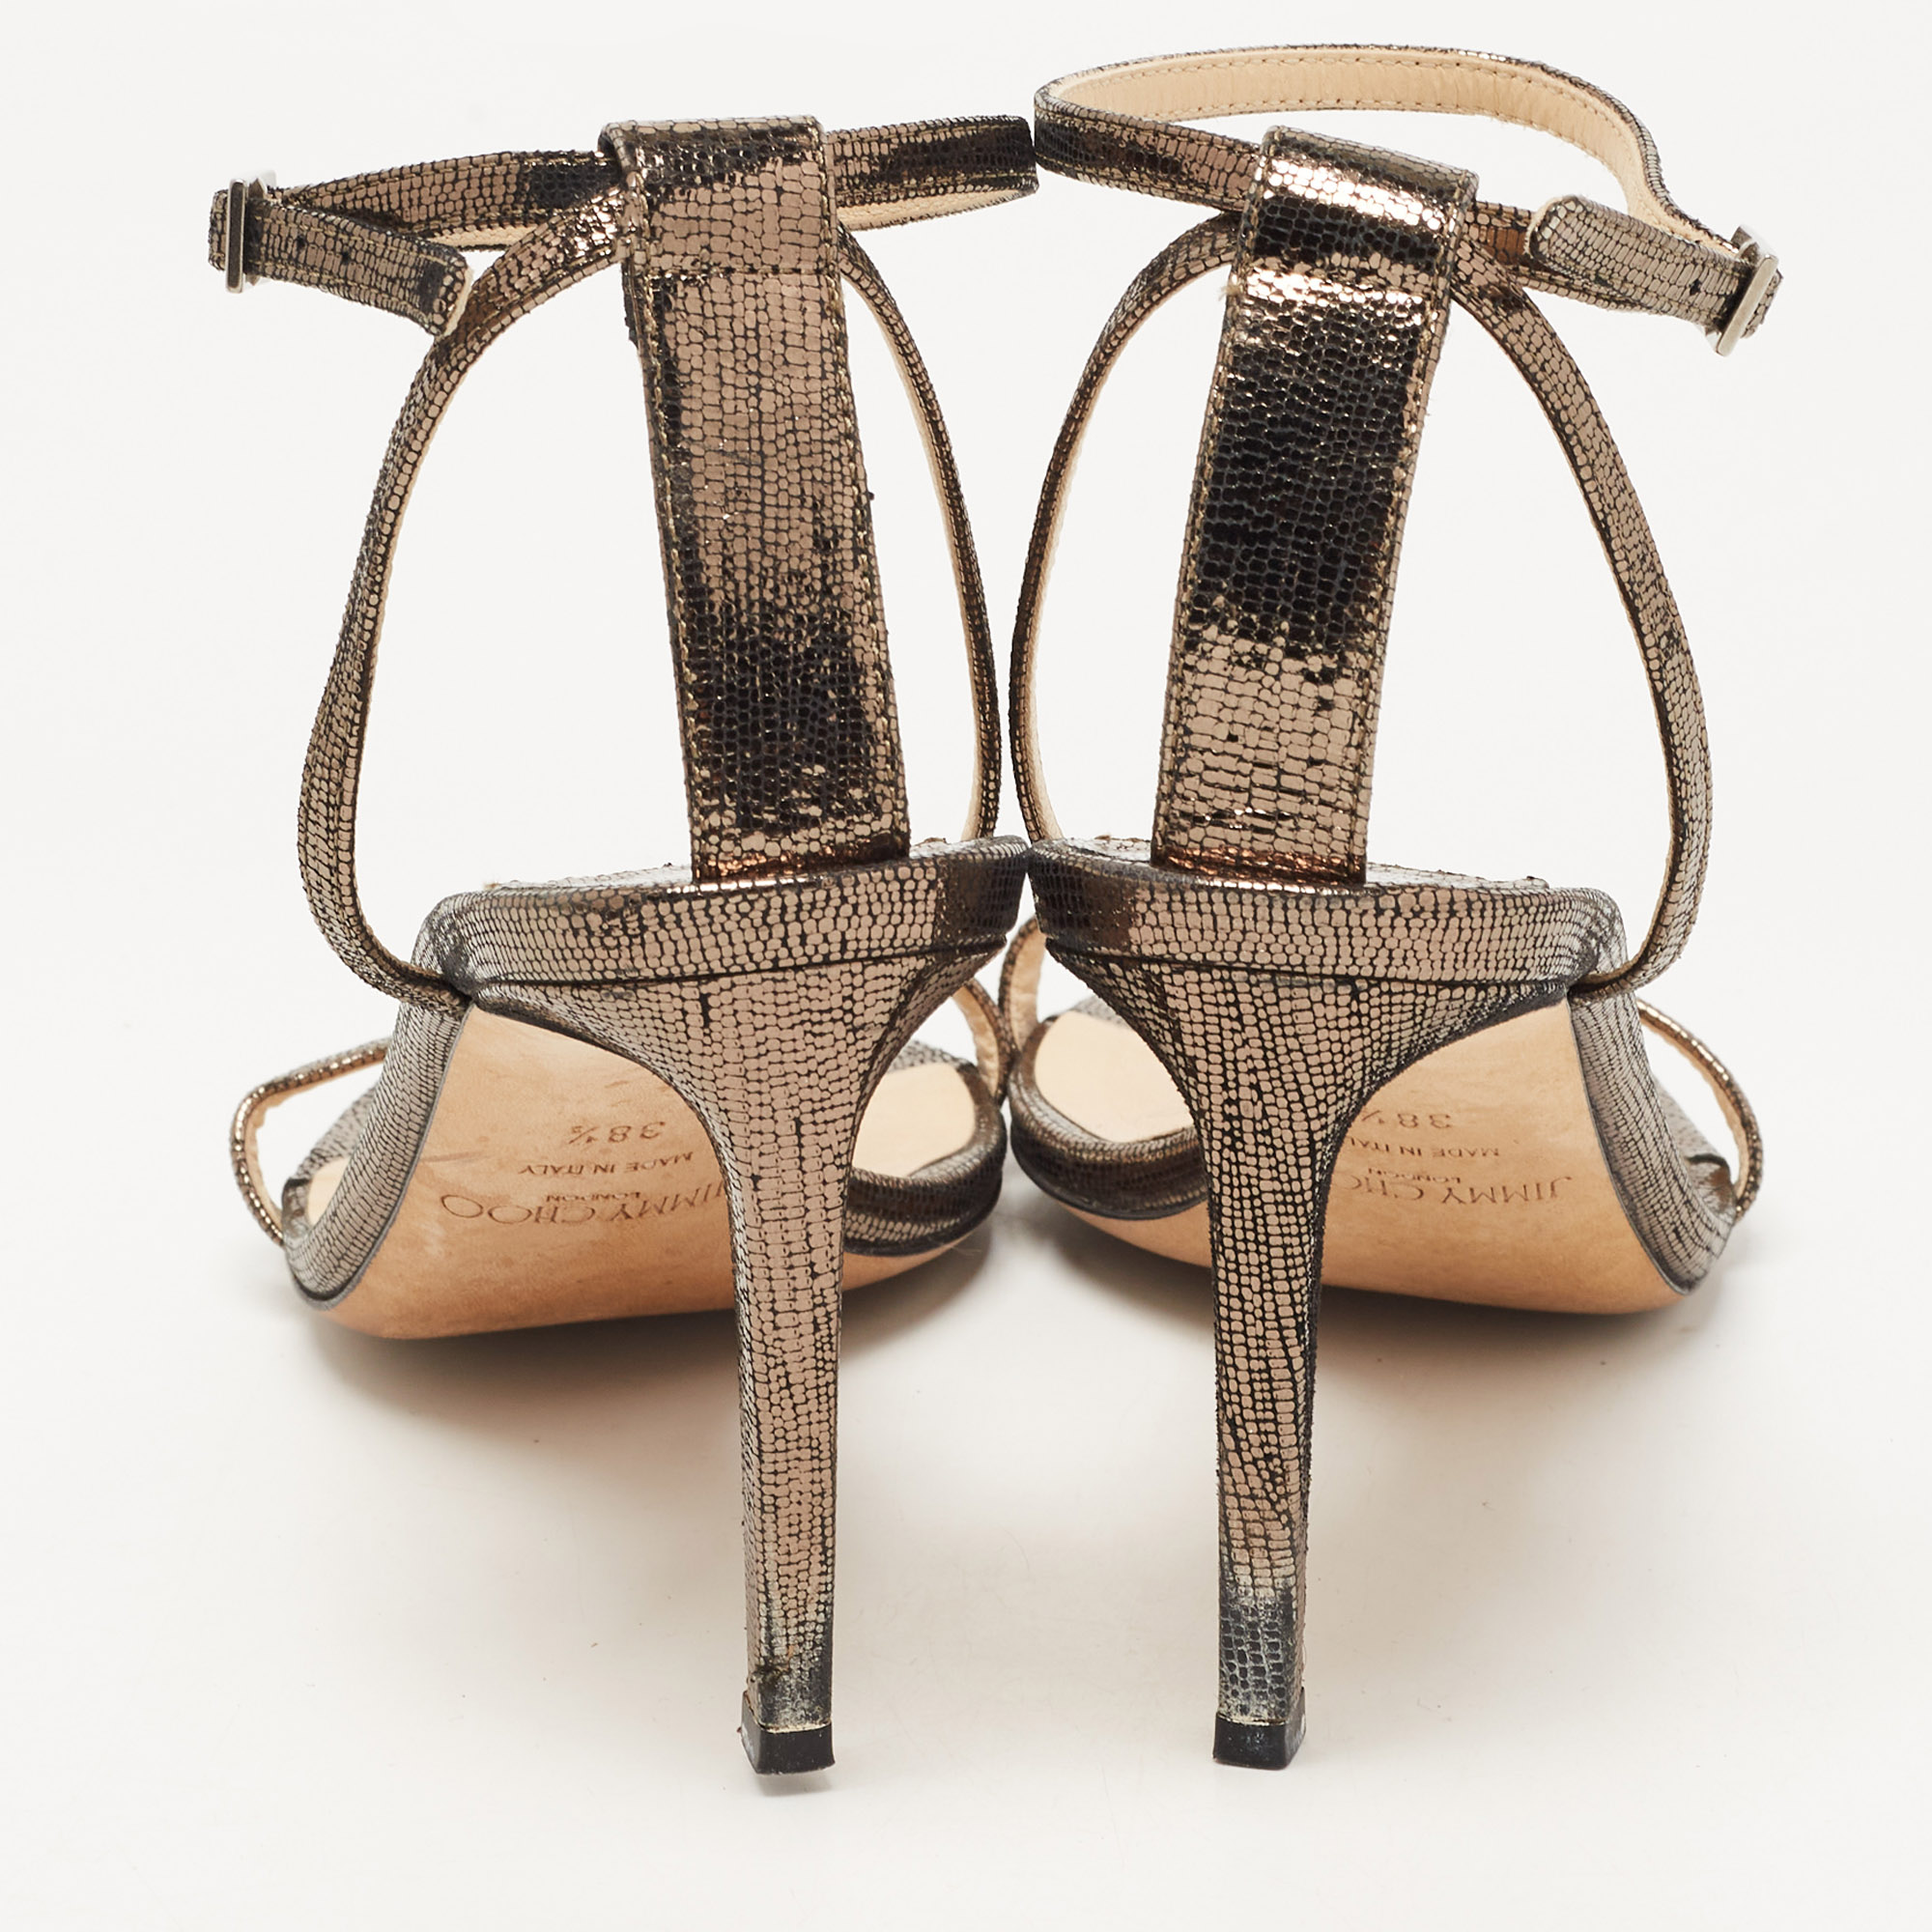 Jimmy Choo Metallic Laminated Suede Minny Sandals Size 38.5